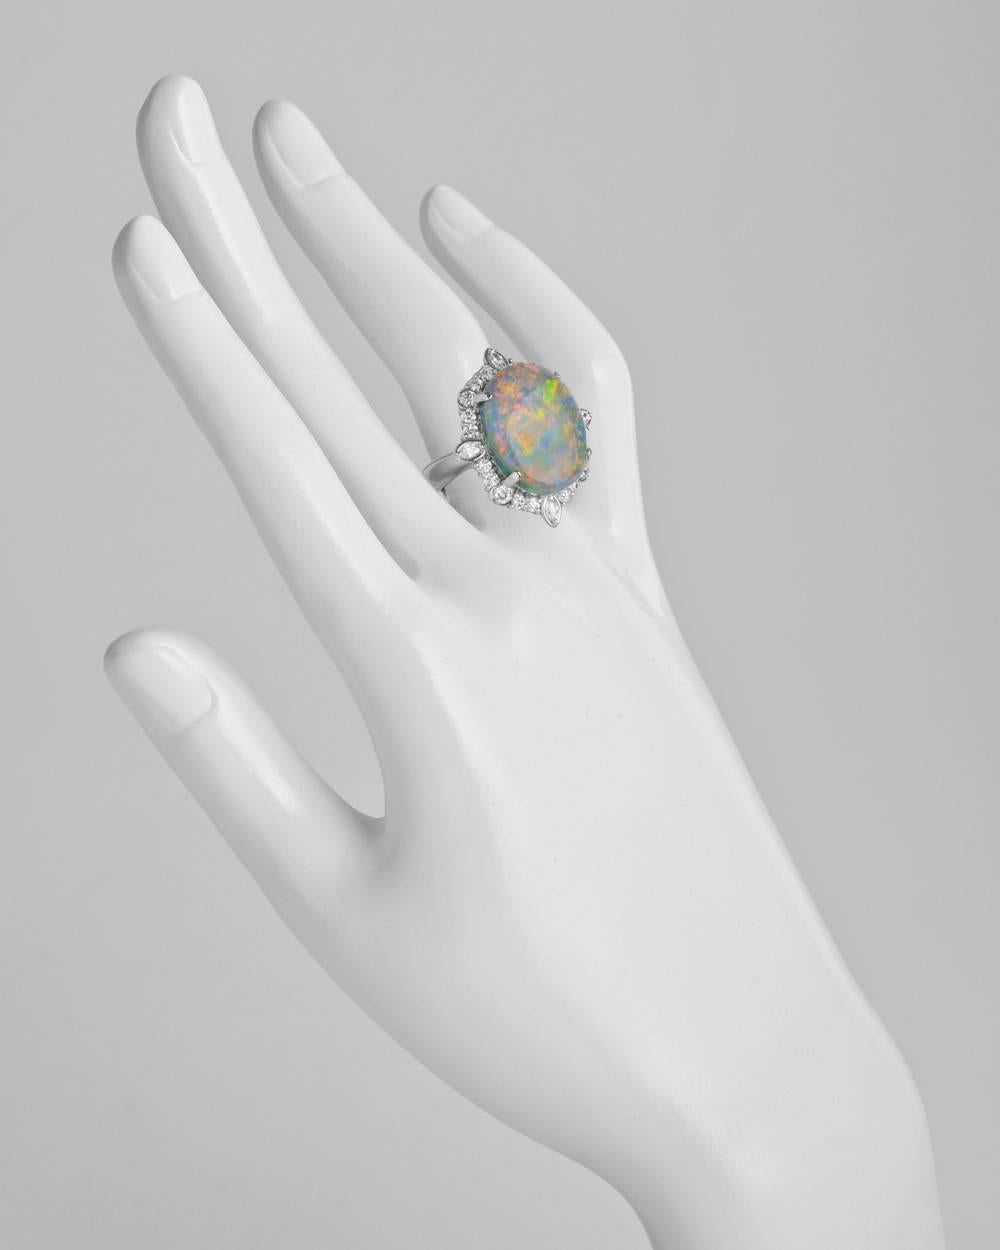 Cocktail ring, centering an oval-shaped opal weighing approximately 11.11 carats and measuring 19 x 15mm, the opal surrounded by round-cut and marquise-shaped diamonds weighing approximately 1.08 total carats, in platinum. Size 6.5 (resizable to